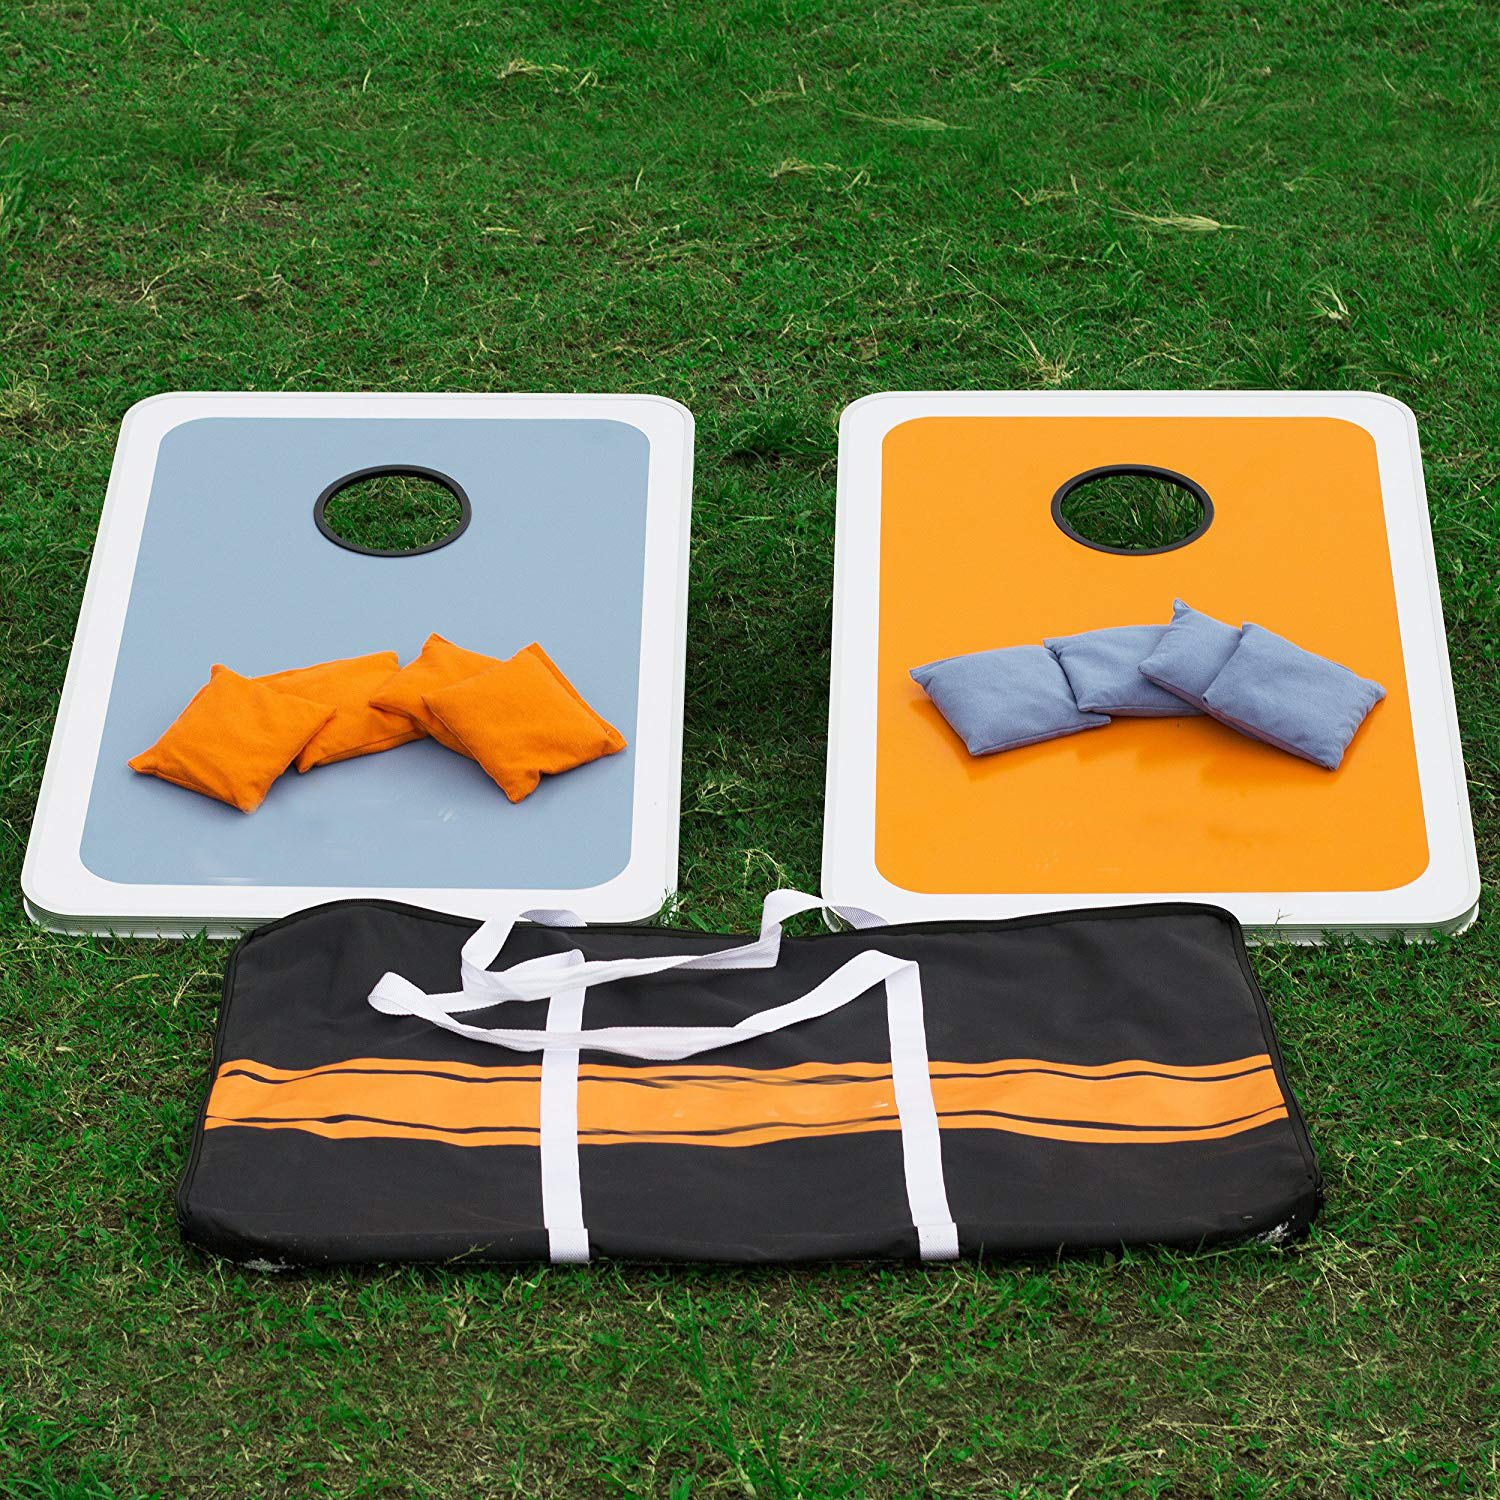 Aluminum-Framed Cornhole Bean Bag Toss Game Set with 8 Double-Lined All-Weather Bean Bags and Carrying Case - copy